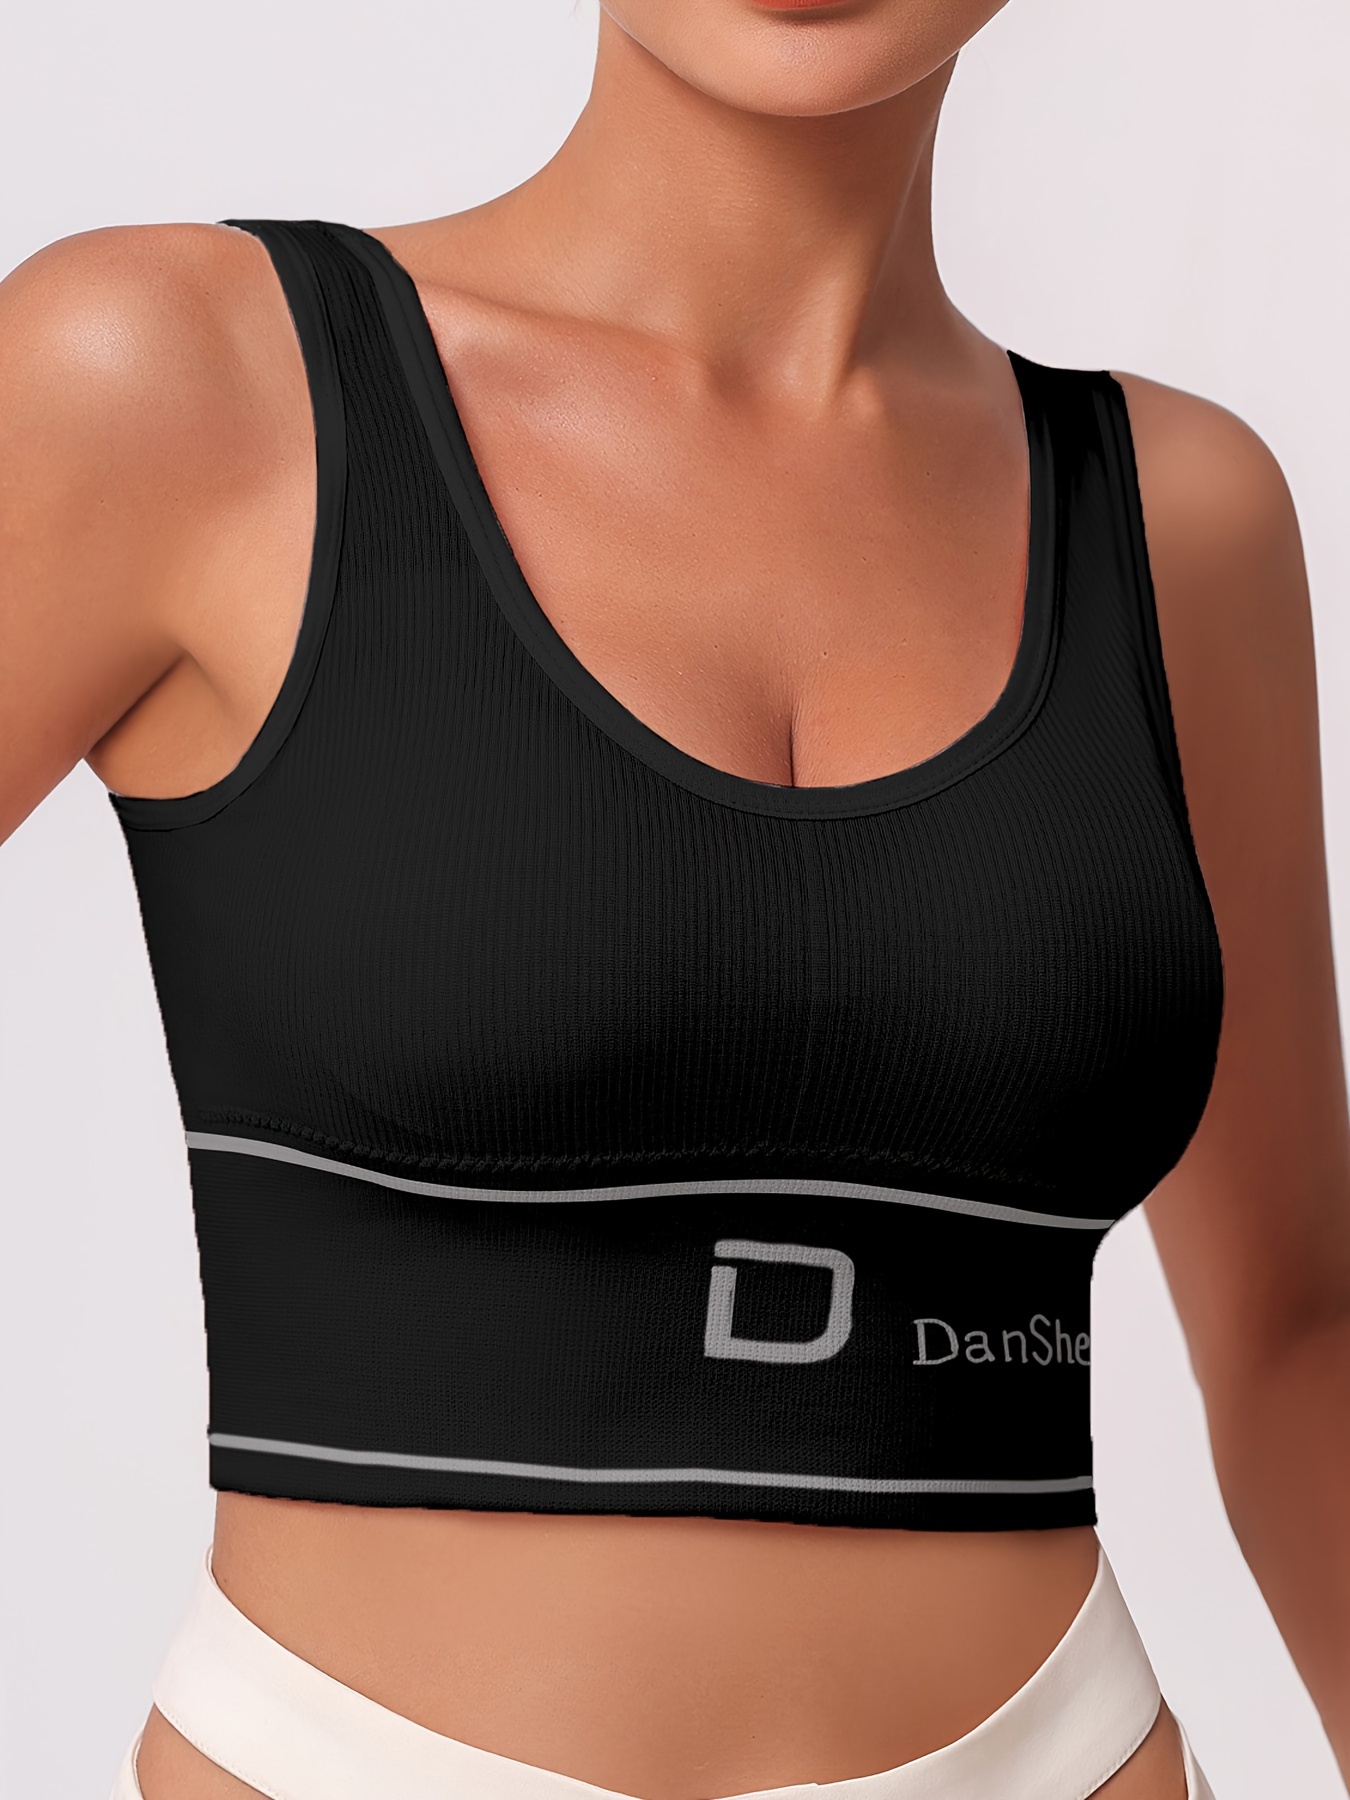 3pcs/pack, Sports Bra, Wireless, Hollow Out Design, Breathable, High  Support, Push Up, Suitable For Yoga